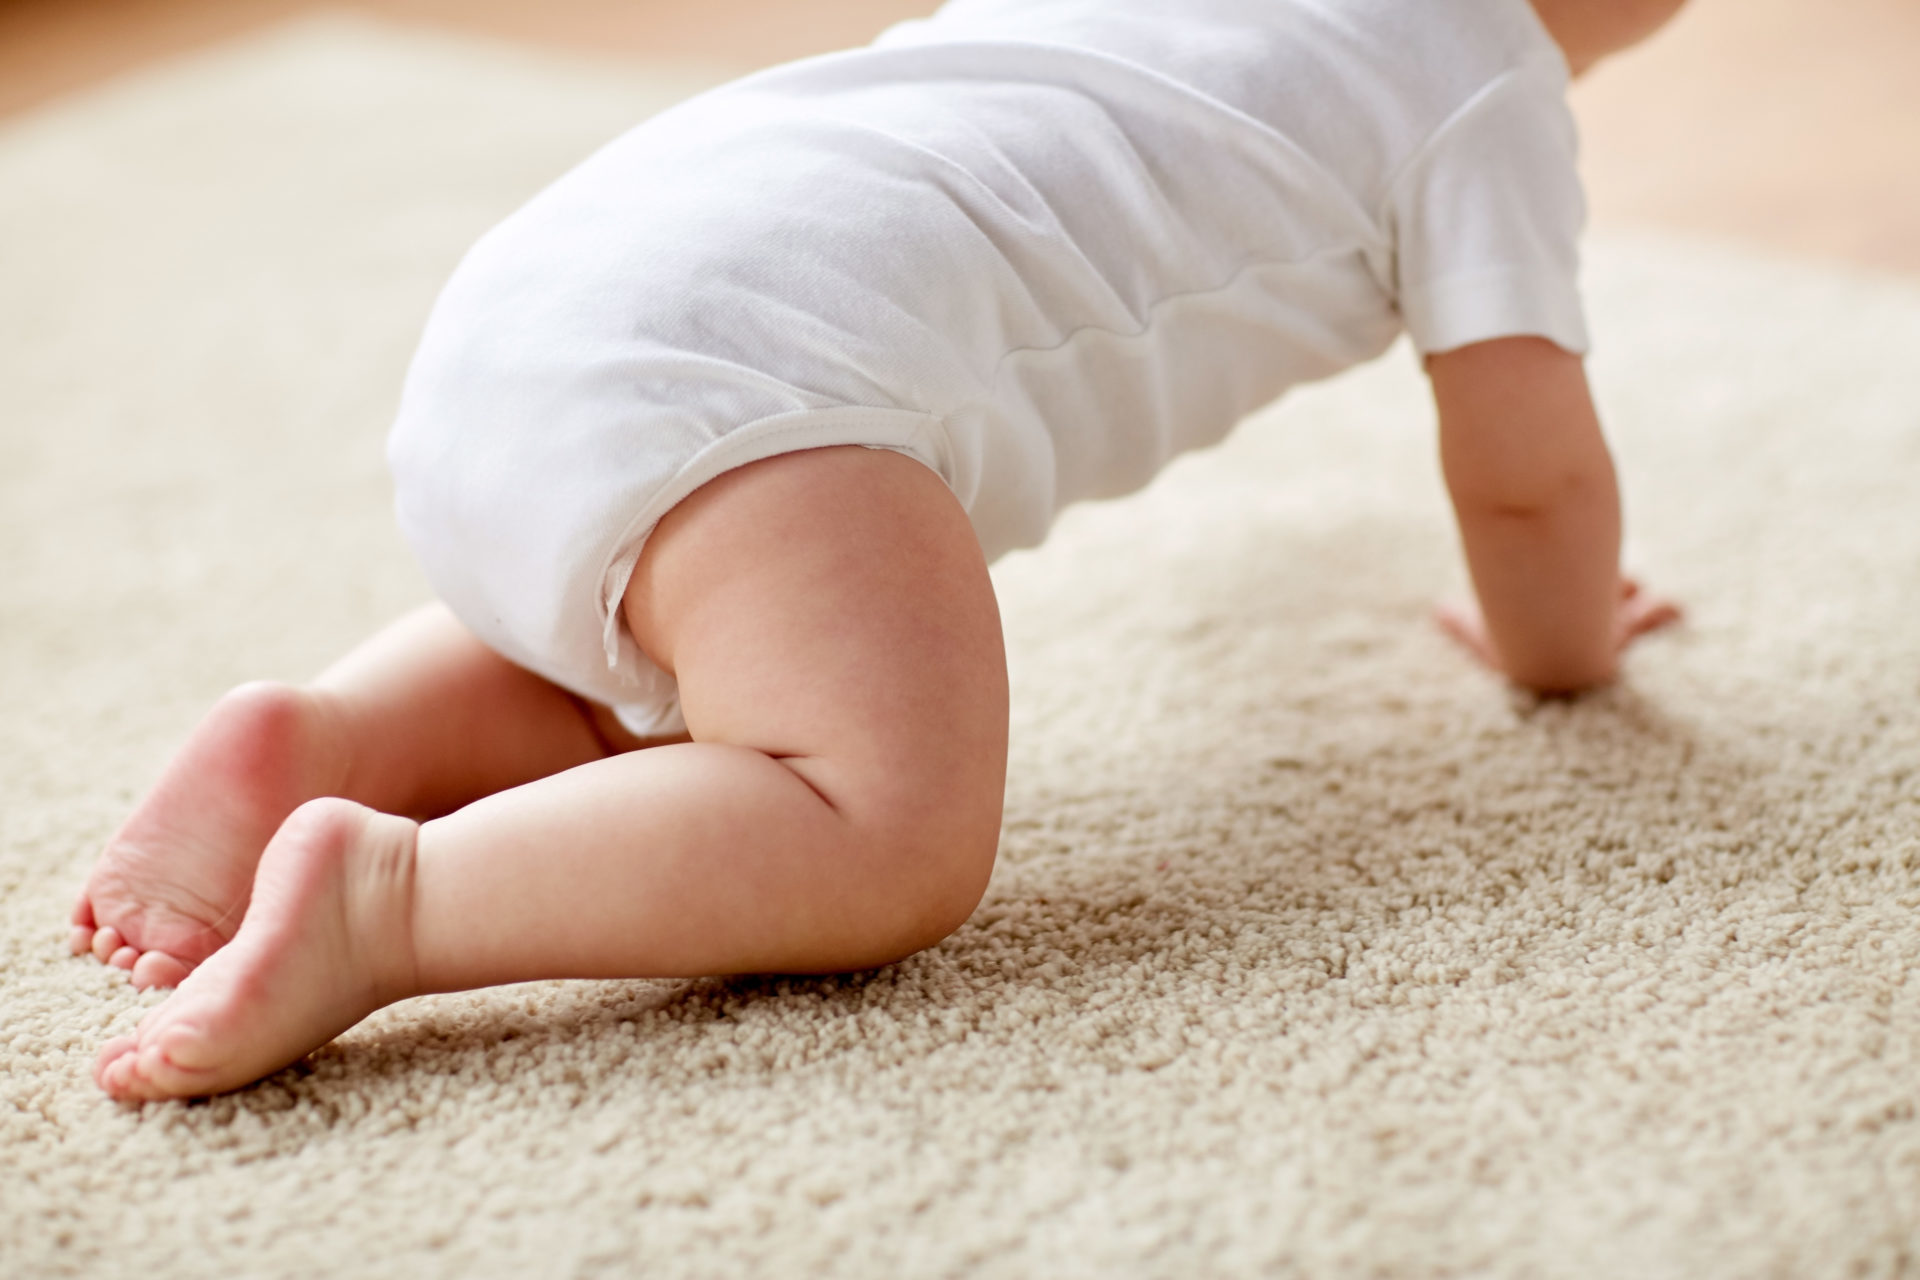 childhood, babyhood and people concept - little baby boy or girl crawling on floor at home